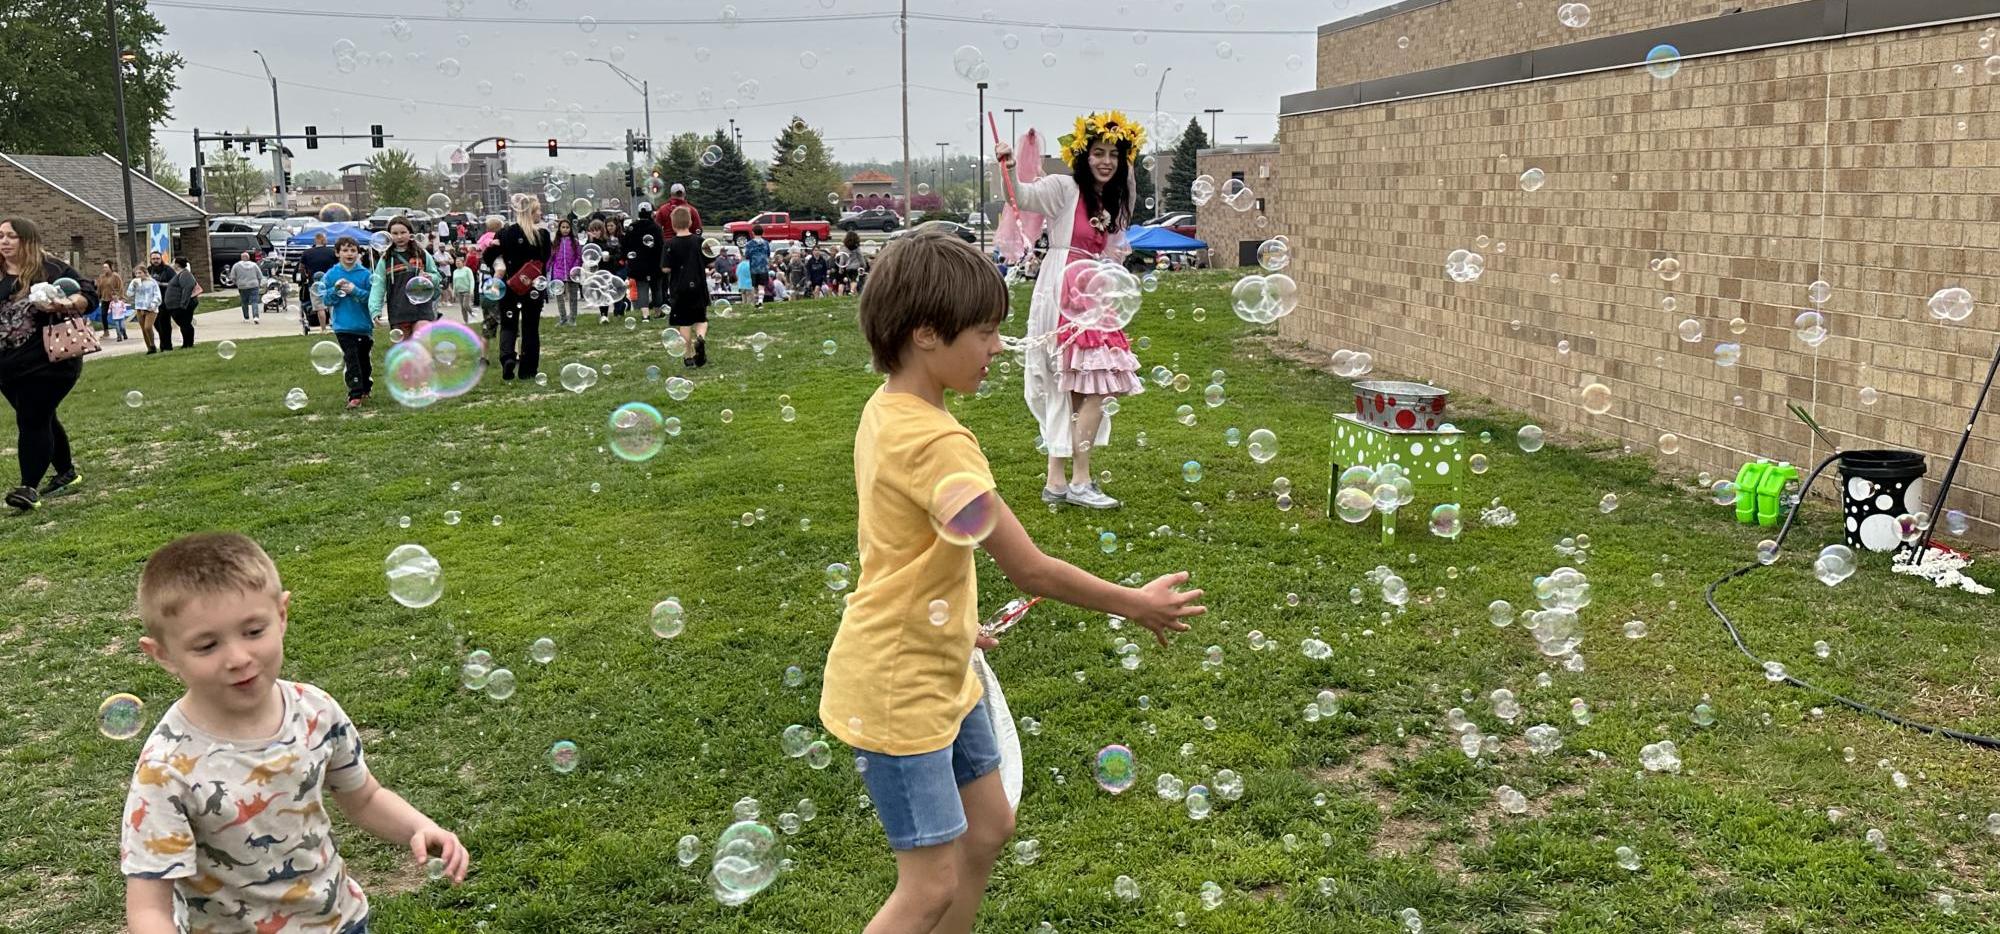 Bubbles at the Carnival